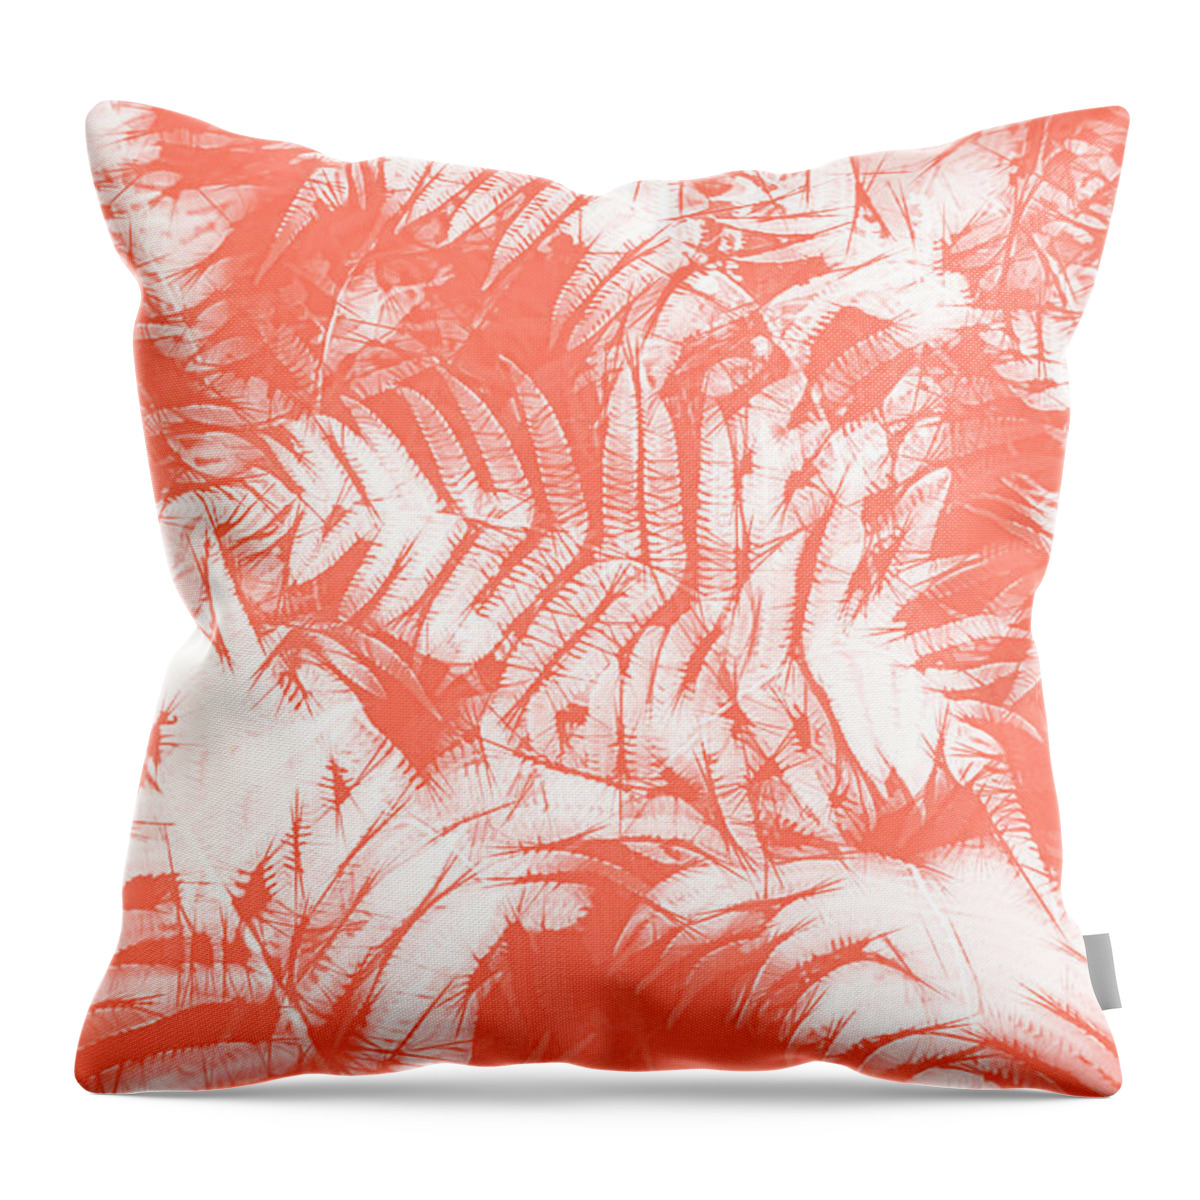 Pantone Throw Pillow featuring the photograph Pantone Abstract Foliage Pattern by Andrea Anderegg